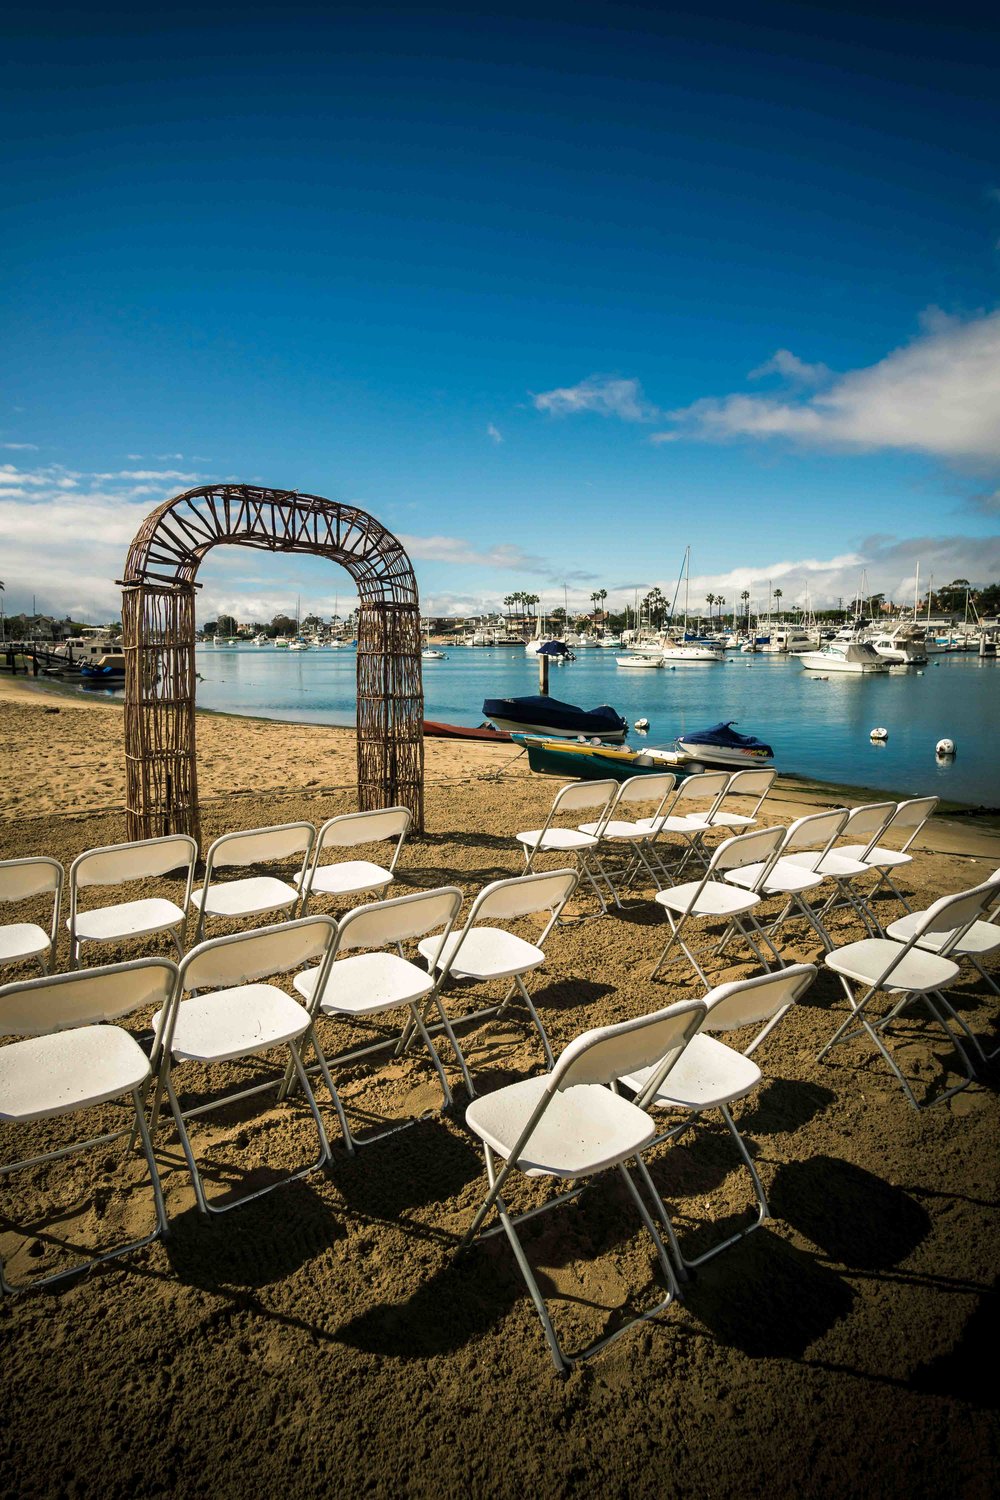 The wedding ceremony before the guests arrive on the beach on diamond street on Balboa Island Newport Beach